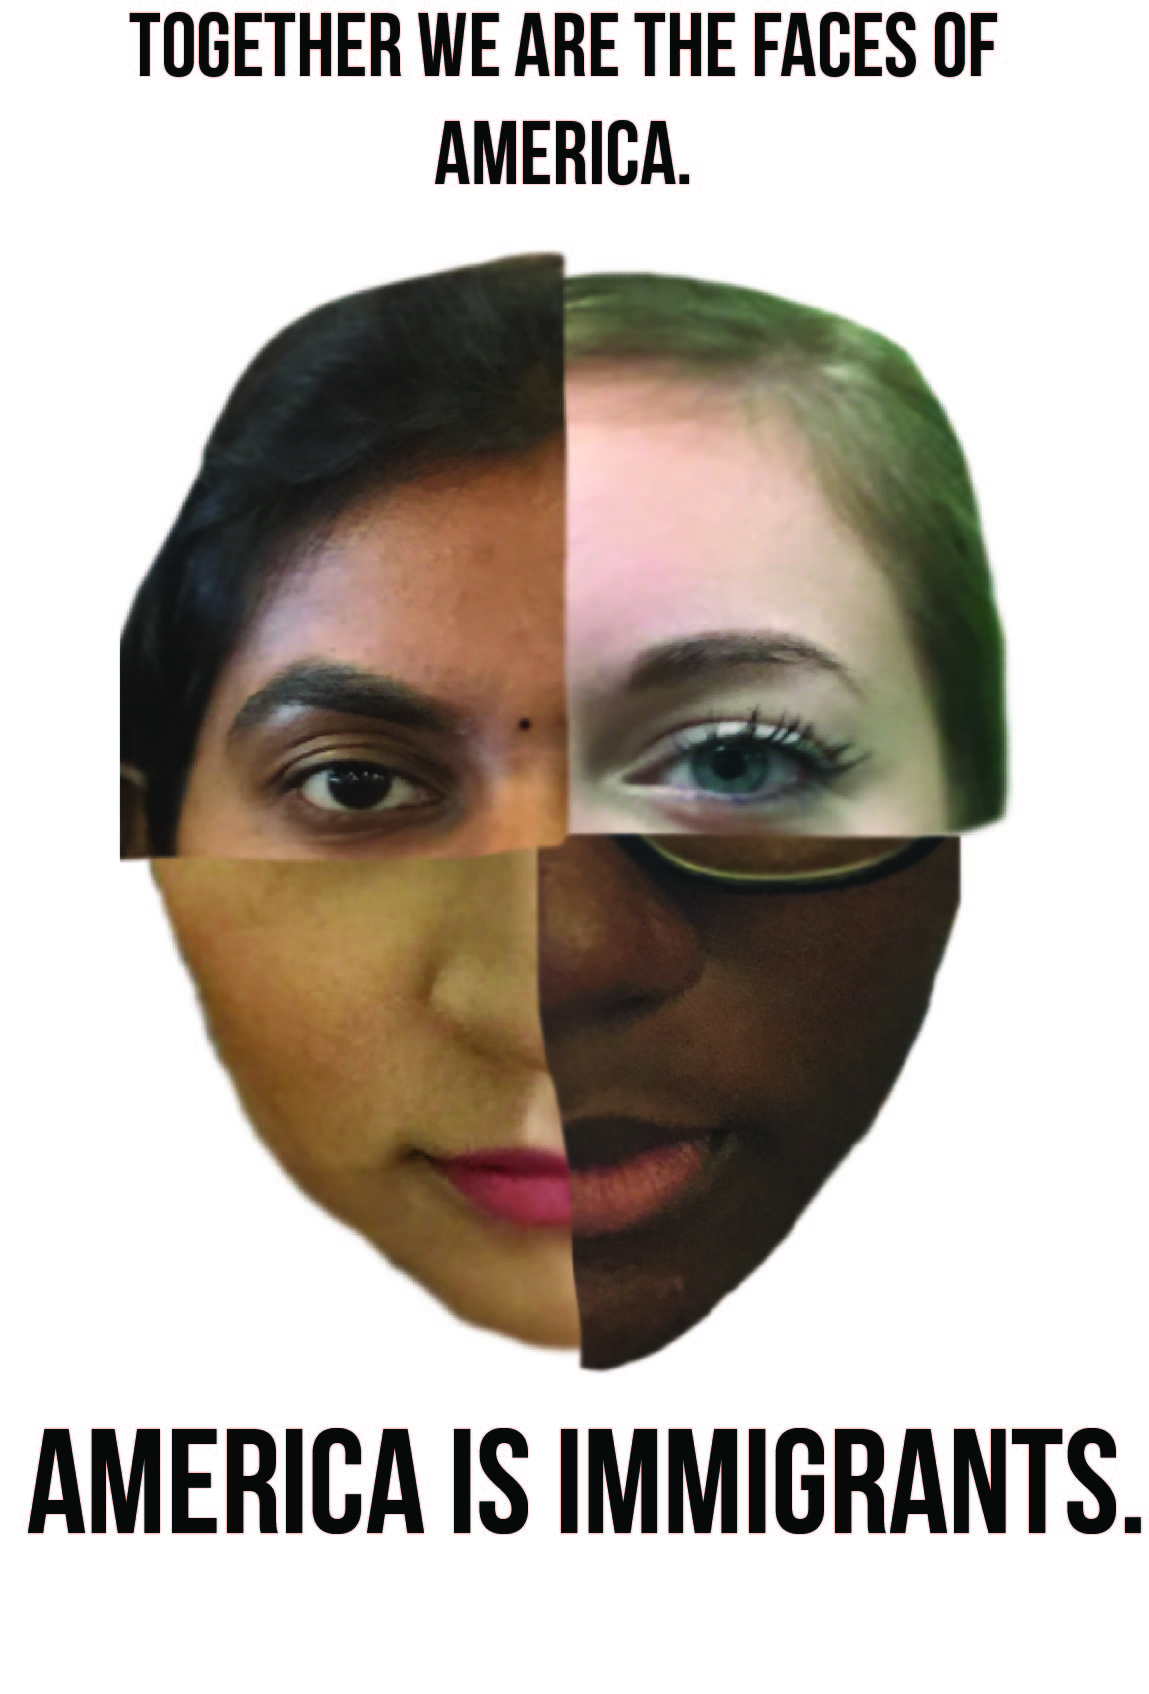 PHOTO: Four students faces were blended together to depict that America is made of immigrants. Students used in collage: Tyler Pullman, Nataly Florez, Amulya Donepudi, Stephanie Krail. Graphic by The Signal reporter, Liz Lopez.